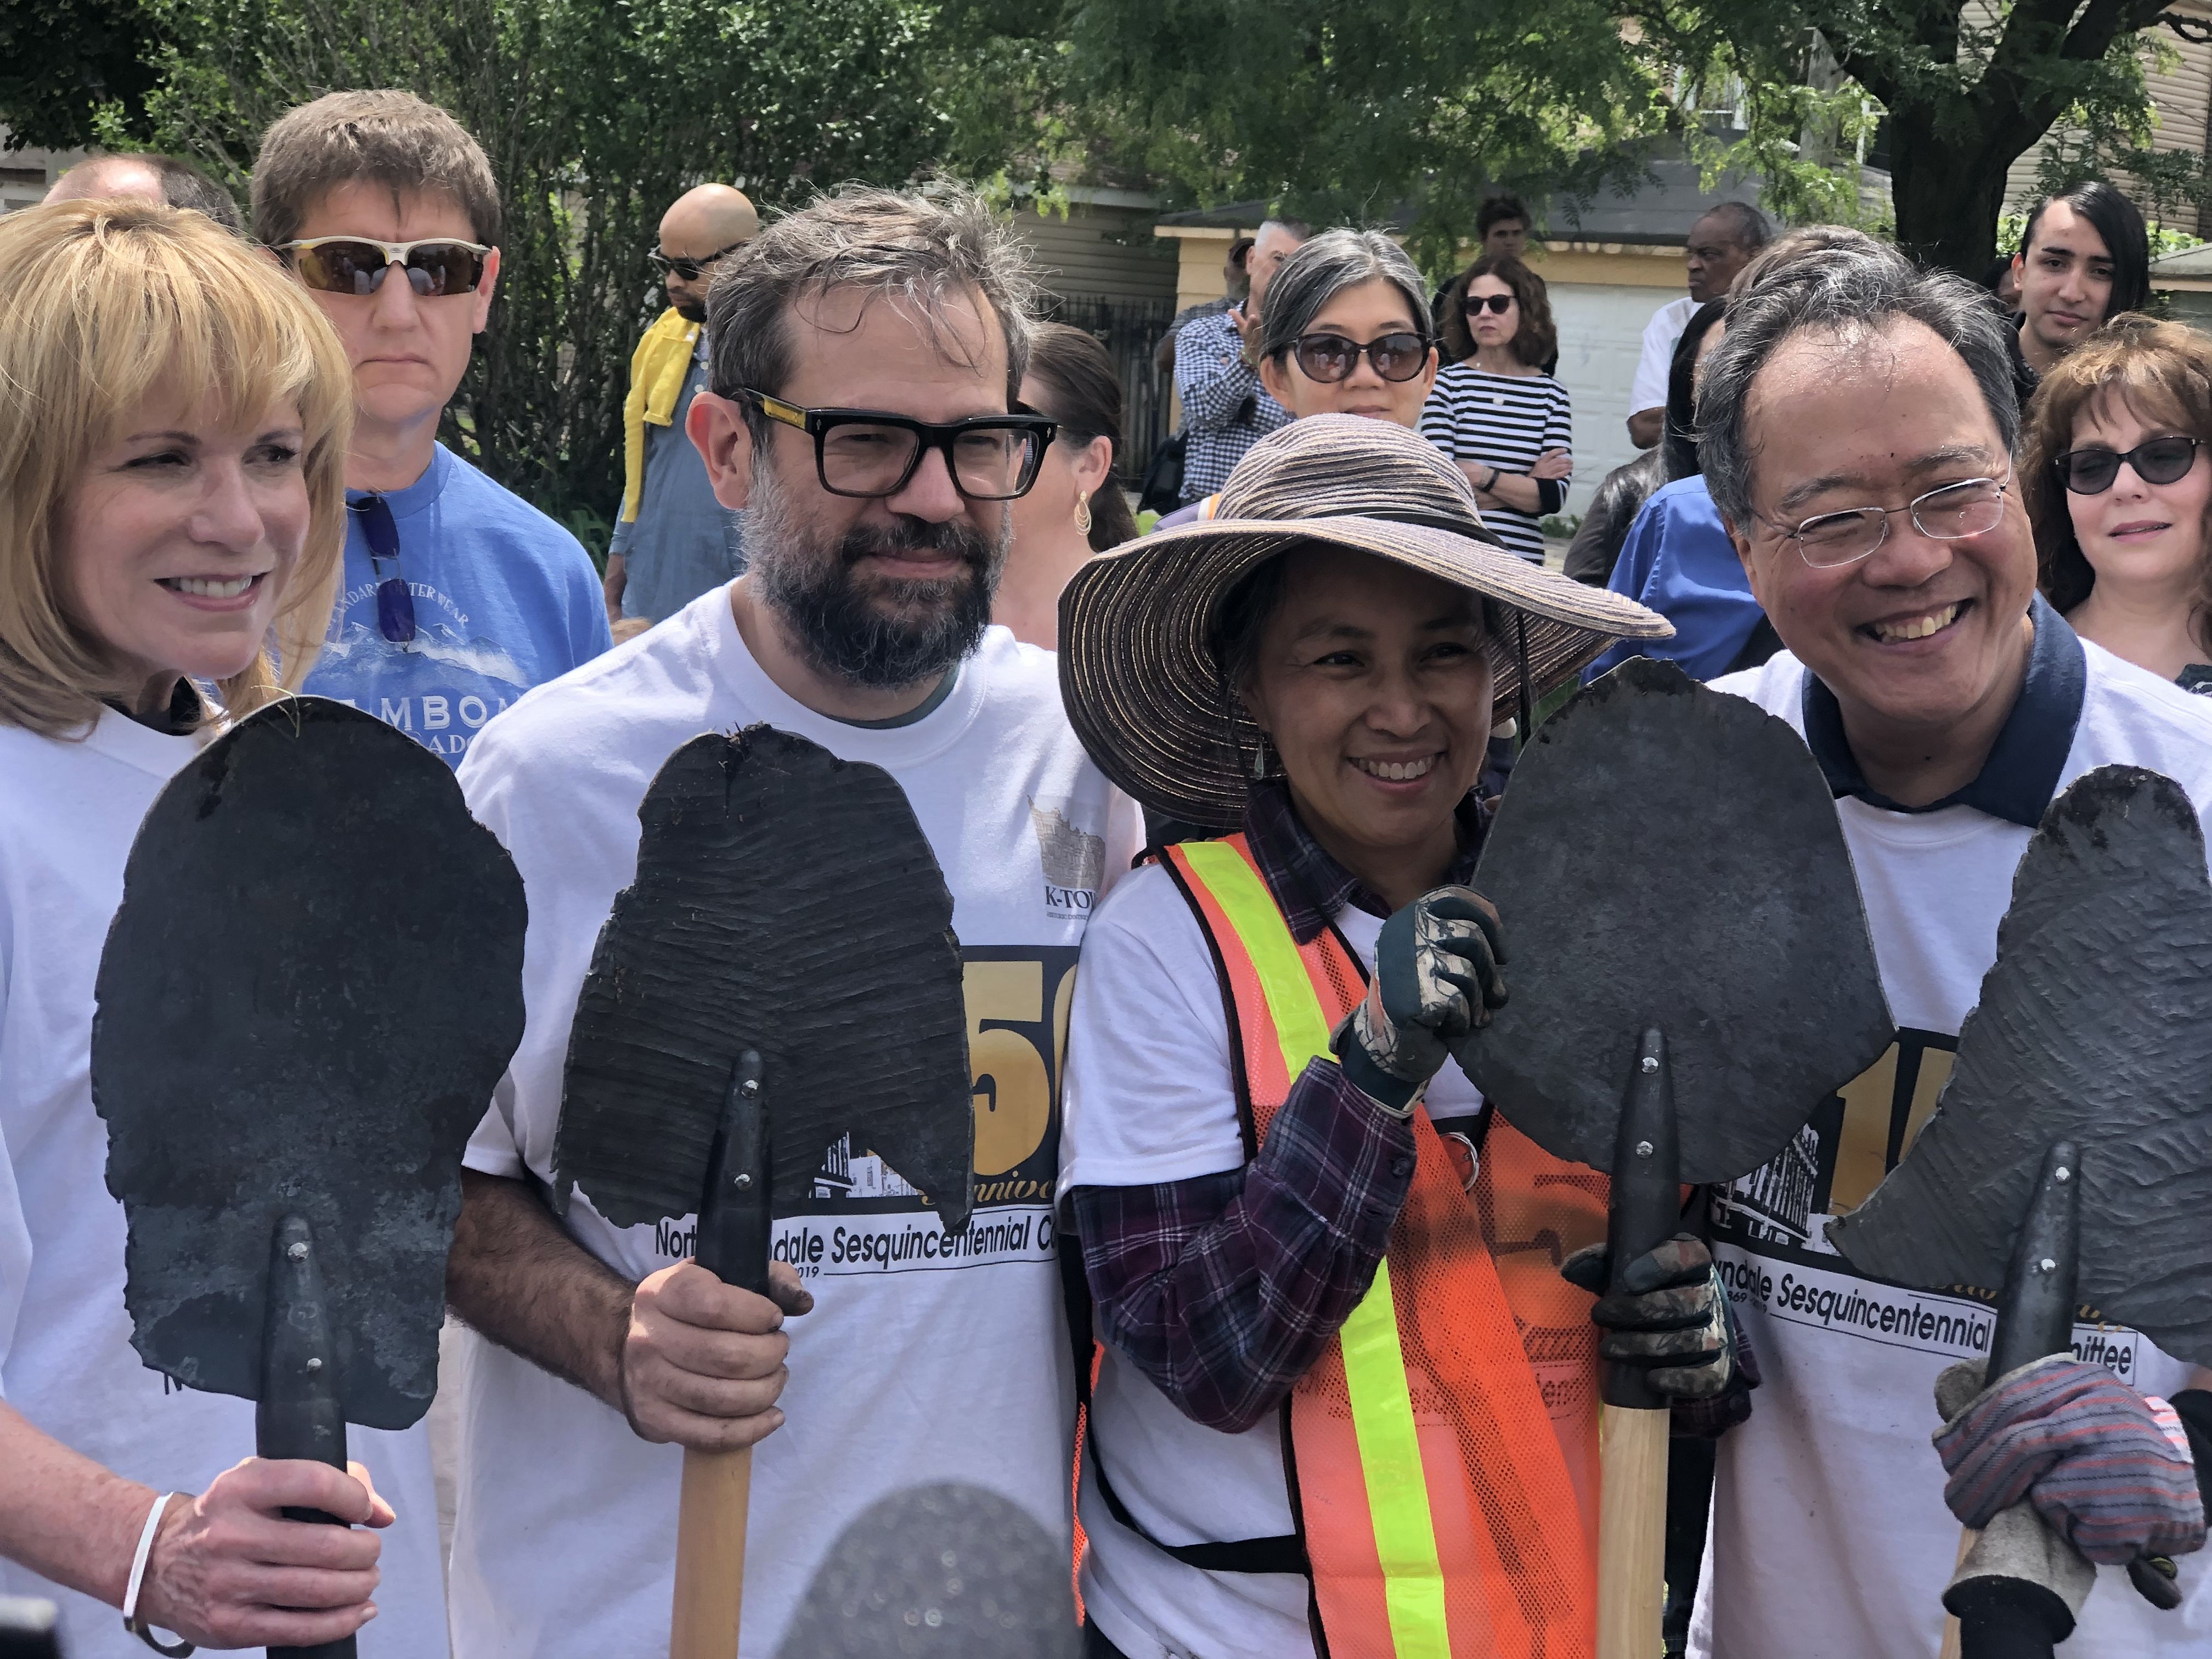 Artist Pedro Reyes and cellist Yo-Yo Ma prepare to plant trees with community members at North Lawndale's 150-year anniversary celebration, presenting Reyes' 2017 work "Palas por pistolas" (Guns into Shovels). Image by Terrance Patterson. United States, 2019.